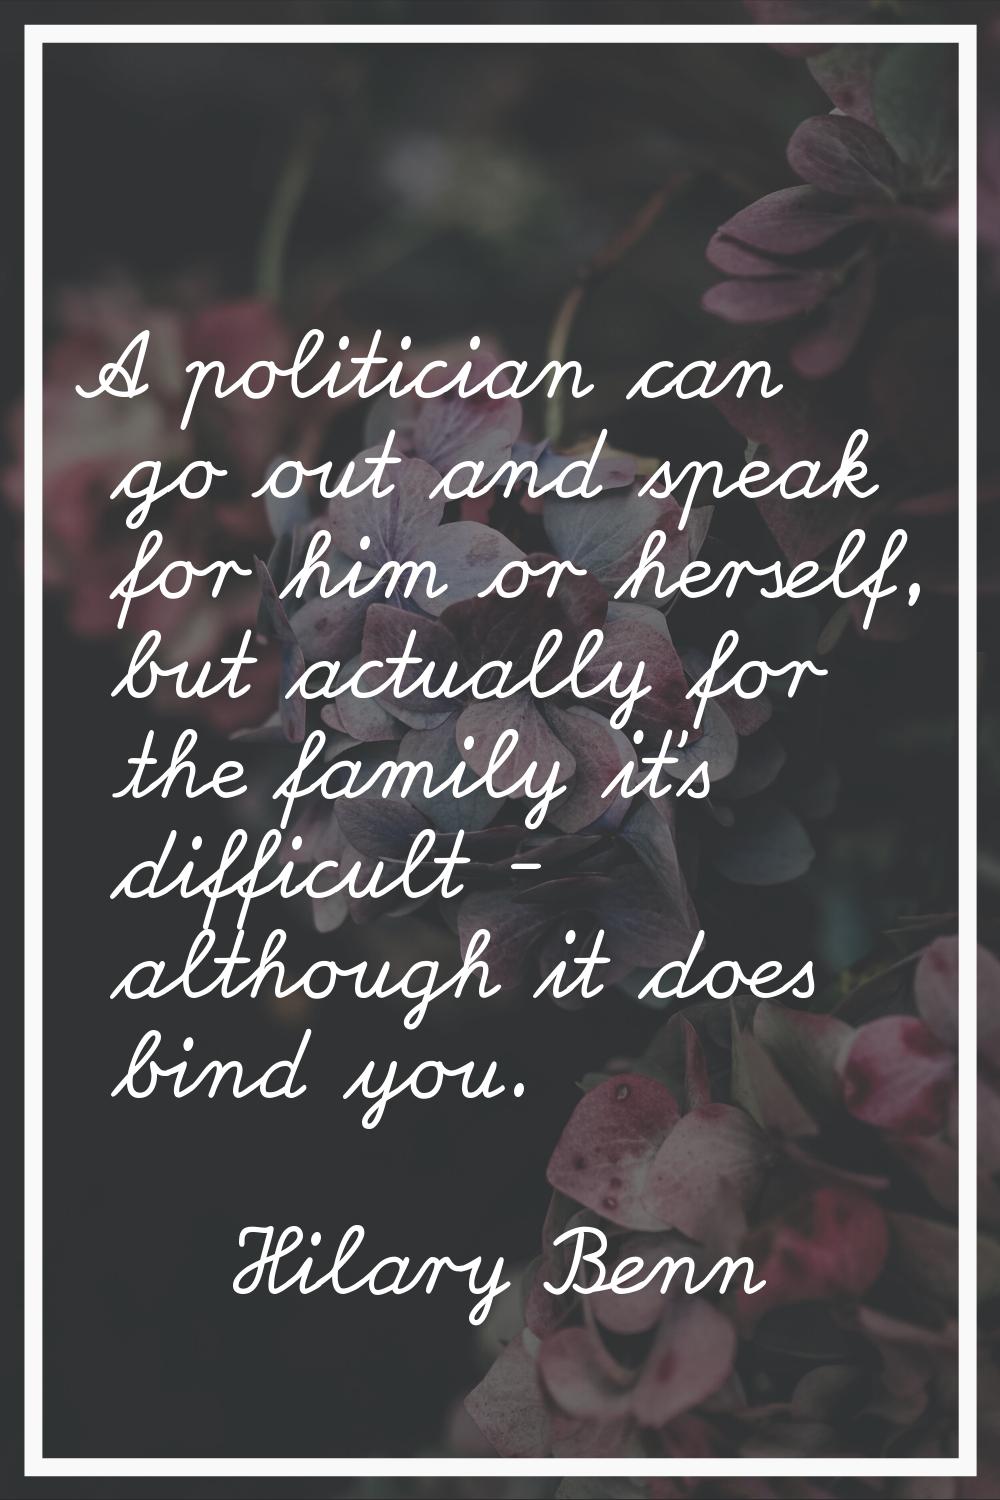 A politician can go out and speak for him or herself, but actually for the family it's difficult - 